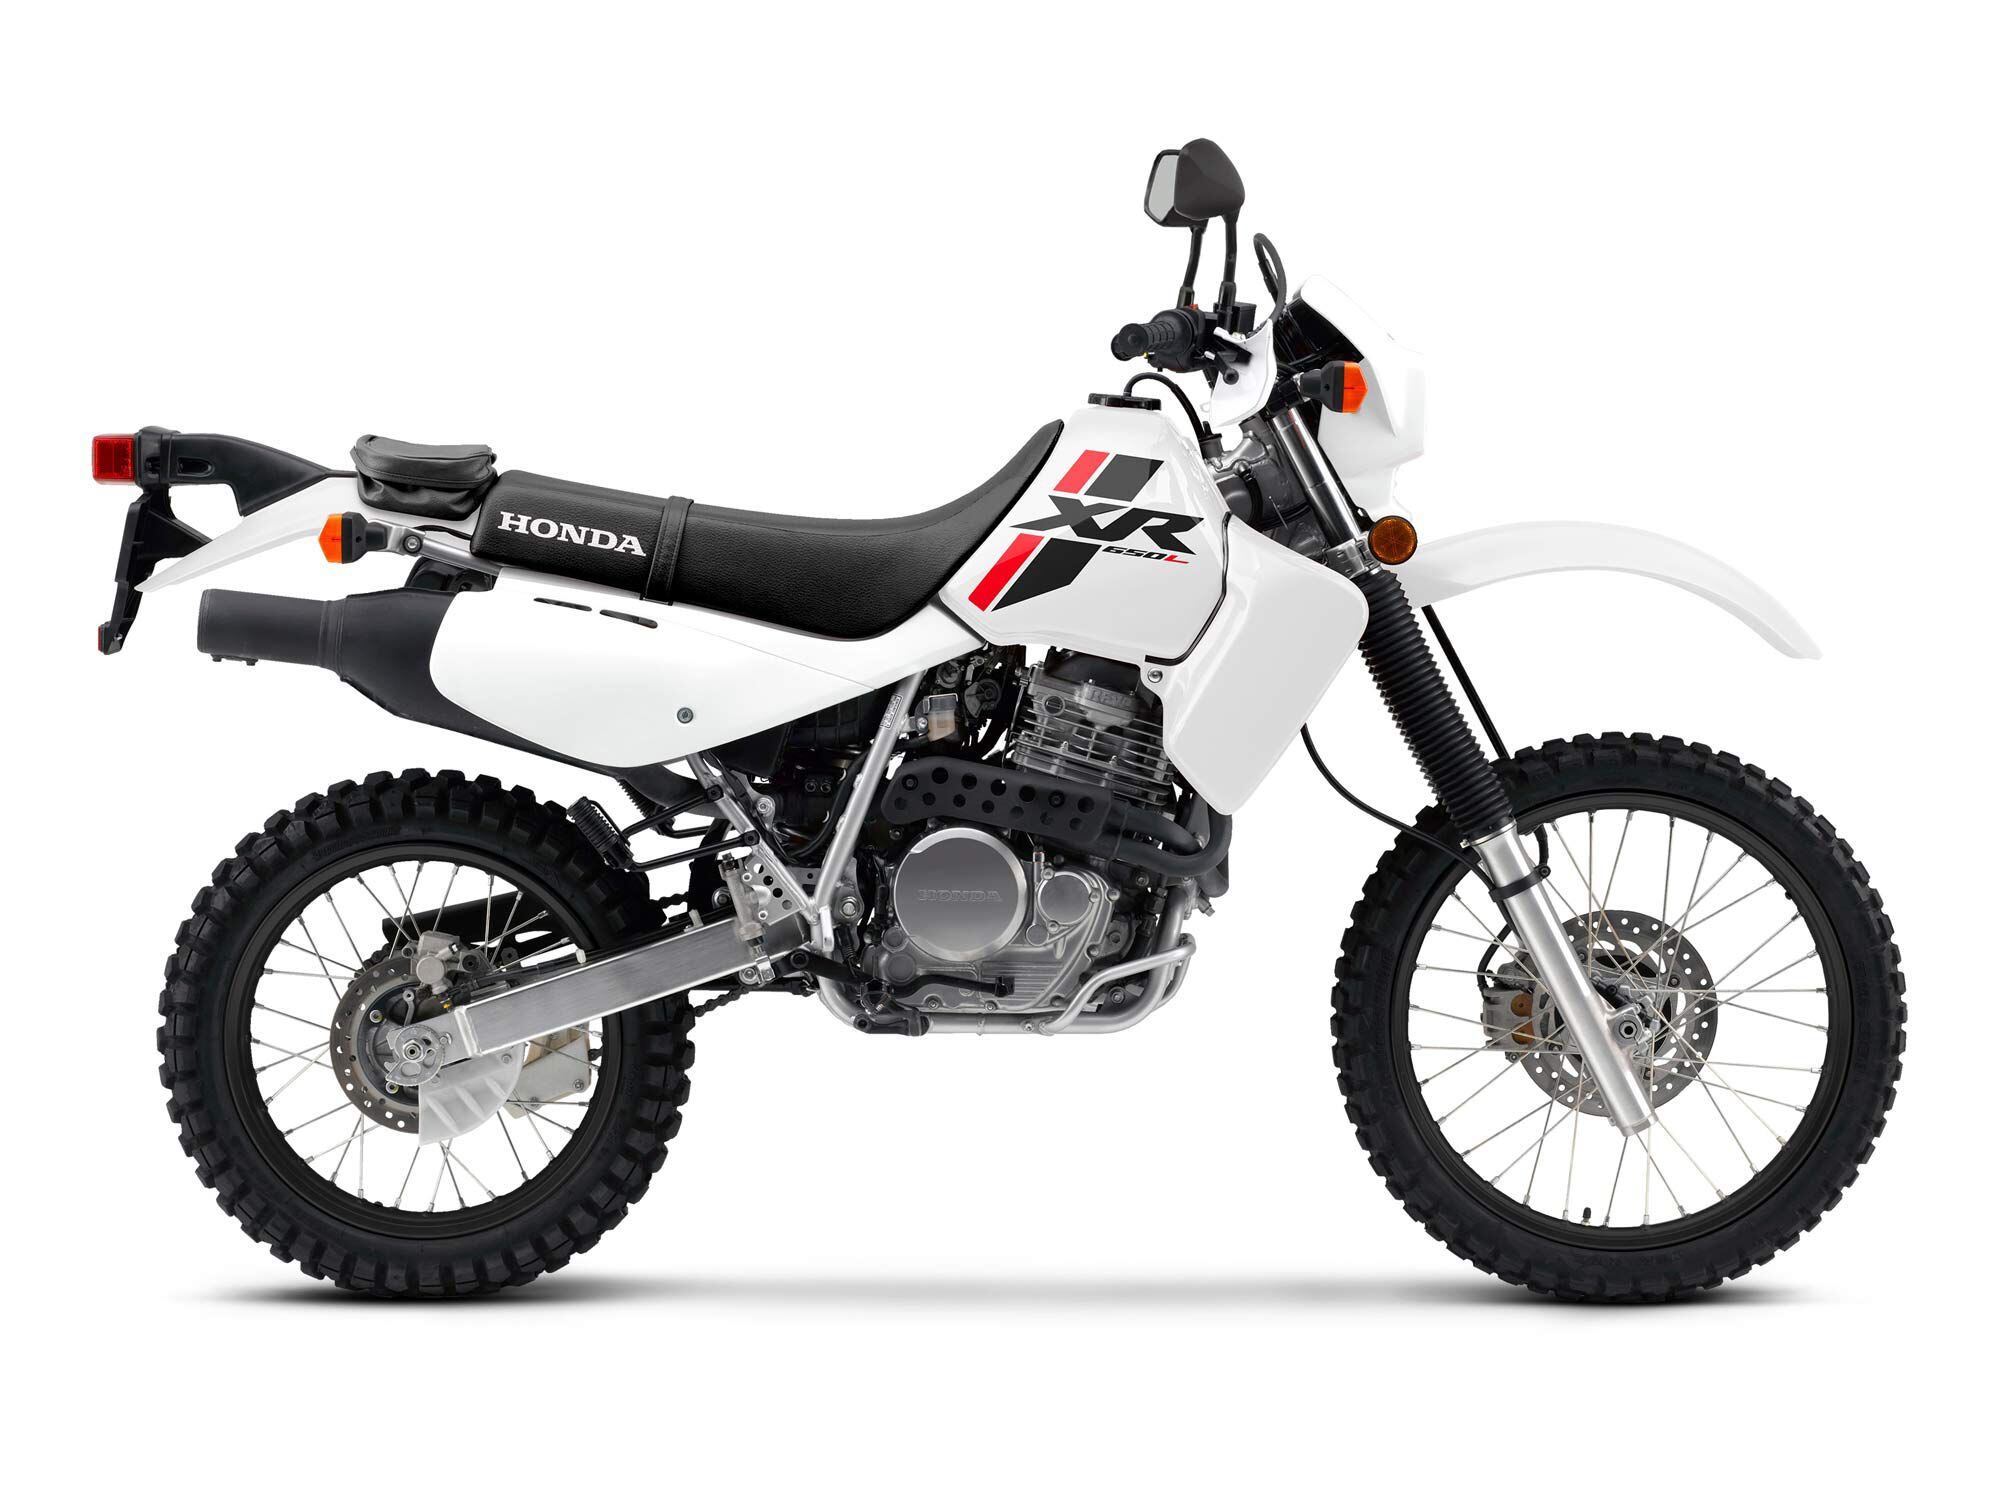 Changes have been limited since the Honda XR650L first hit dealer floors. The 2023 installment of this popular dual sport carries on unchanged.